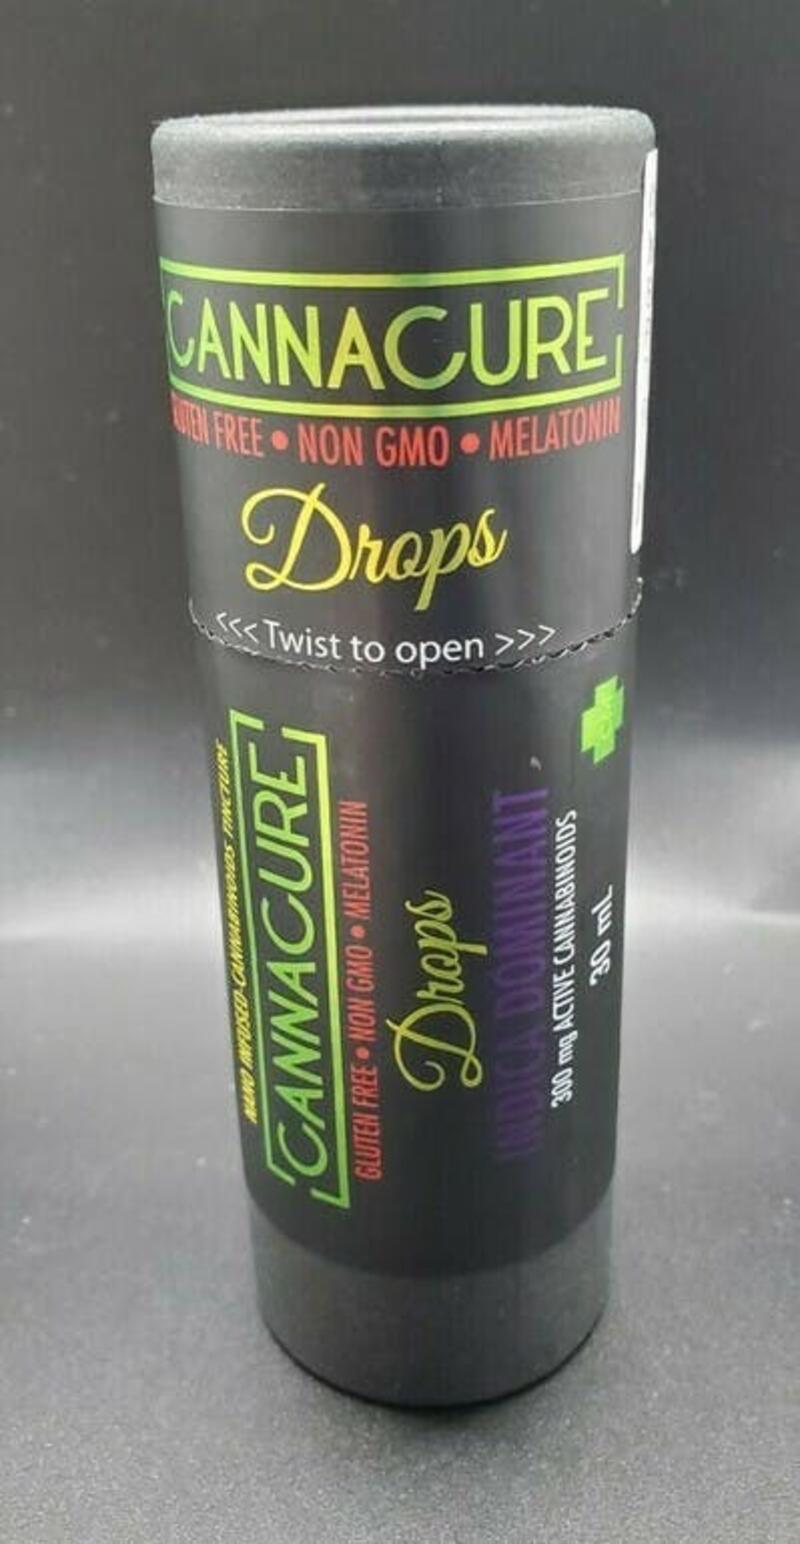 Cannacure Drops Indica Dominant Tincture BK 300mg